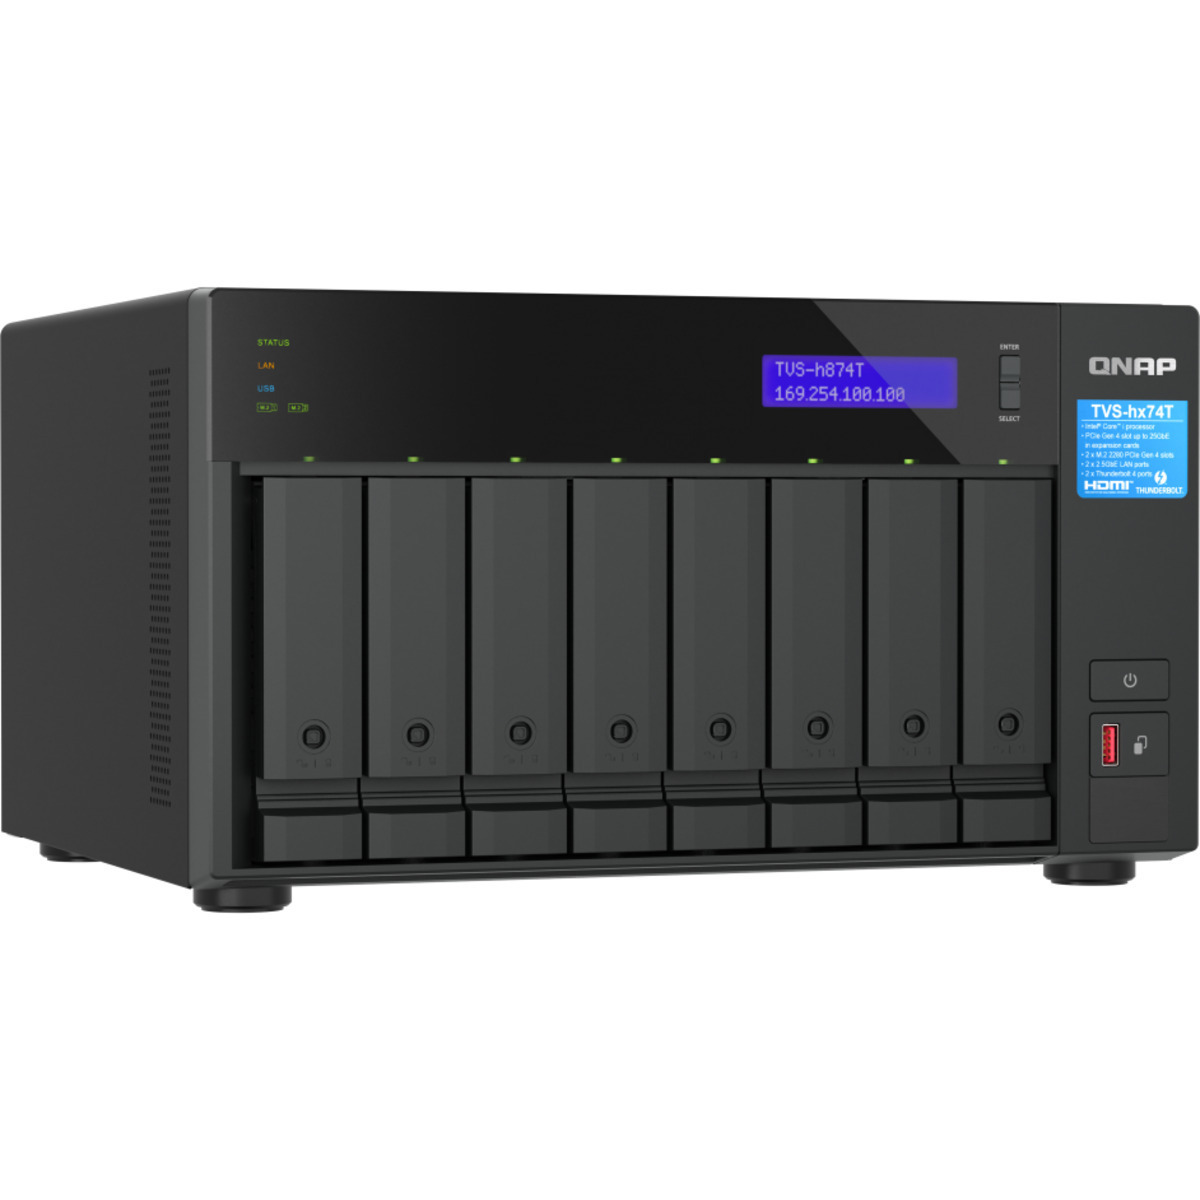 QNAP TVS-h874T Core i9 Thunderbolt 4 80tb 8-Bay Desktop Multimedia / Power User / Business DAS-NAS - Combo Direct + Network Storage Device 8x10tb Seagate IronWolf ST10000VN000 3.5 7200rpm SATA 6Gb/s HDD NAS Class Drives Installed - Burn-In Tested TVS-h874T Core i9 Thunderbolt 4